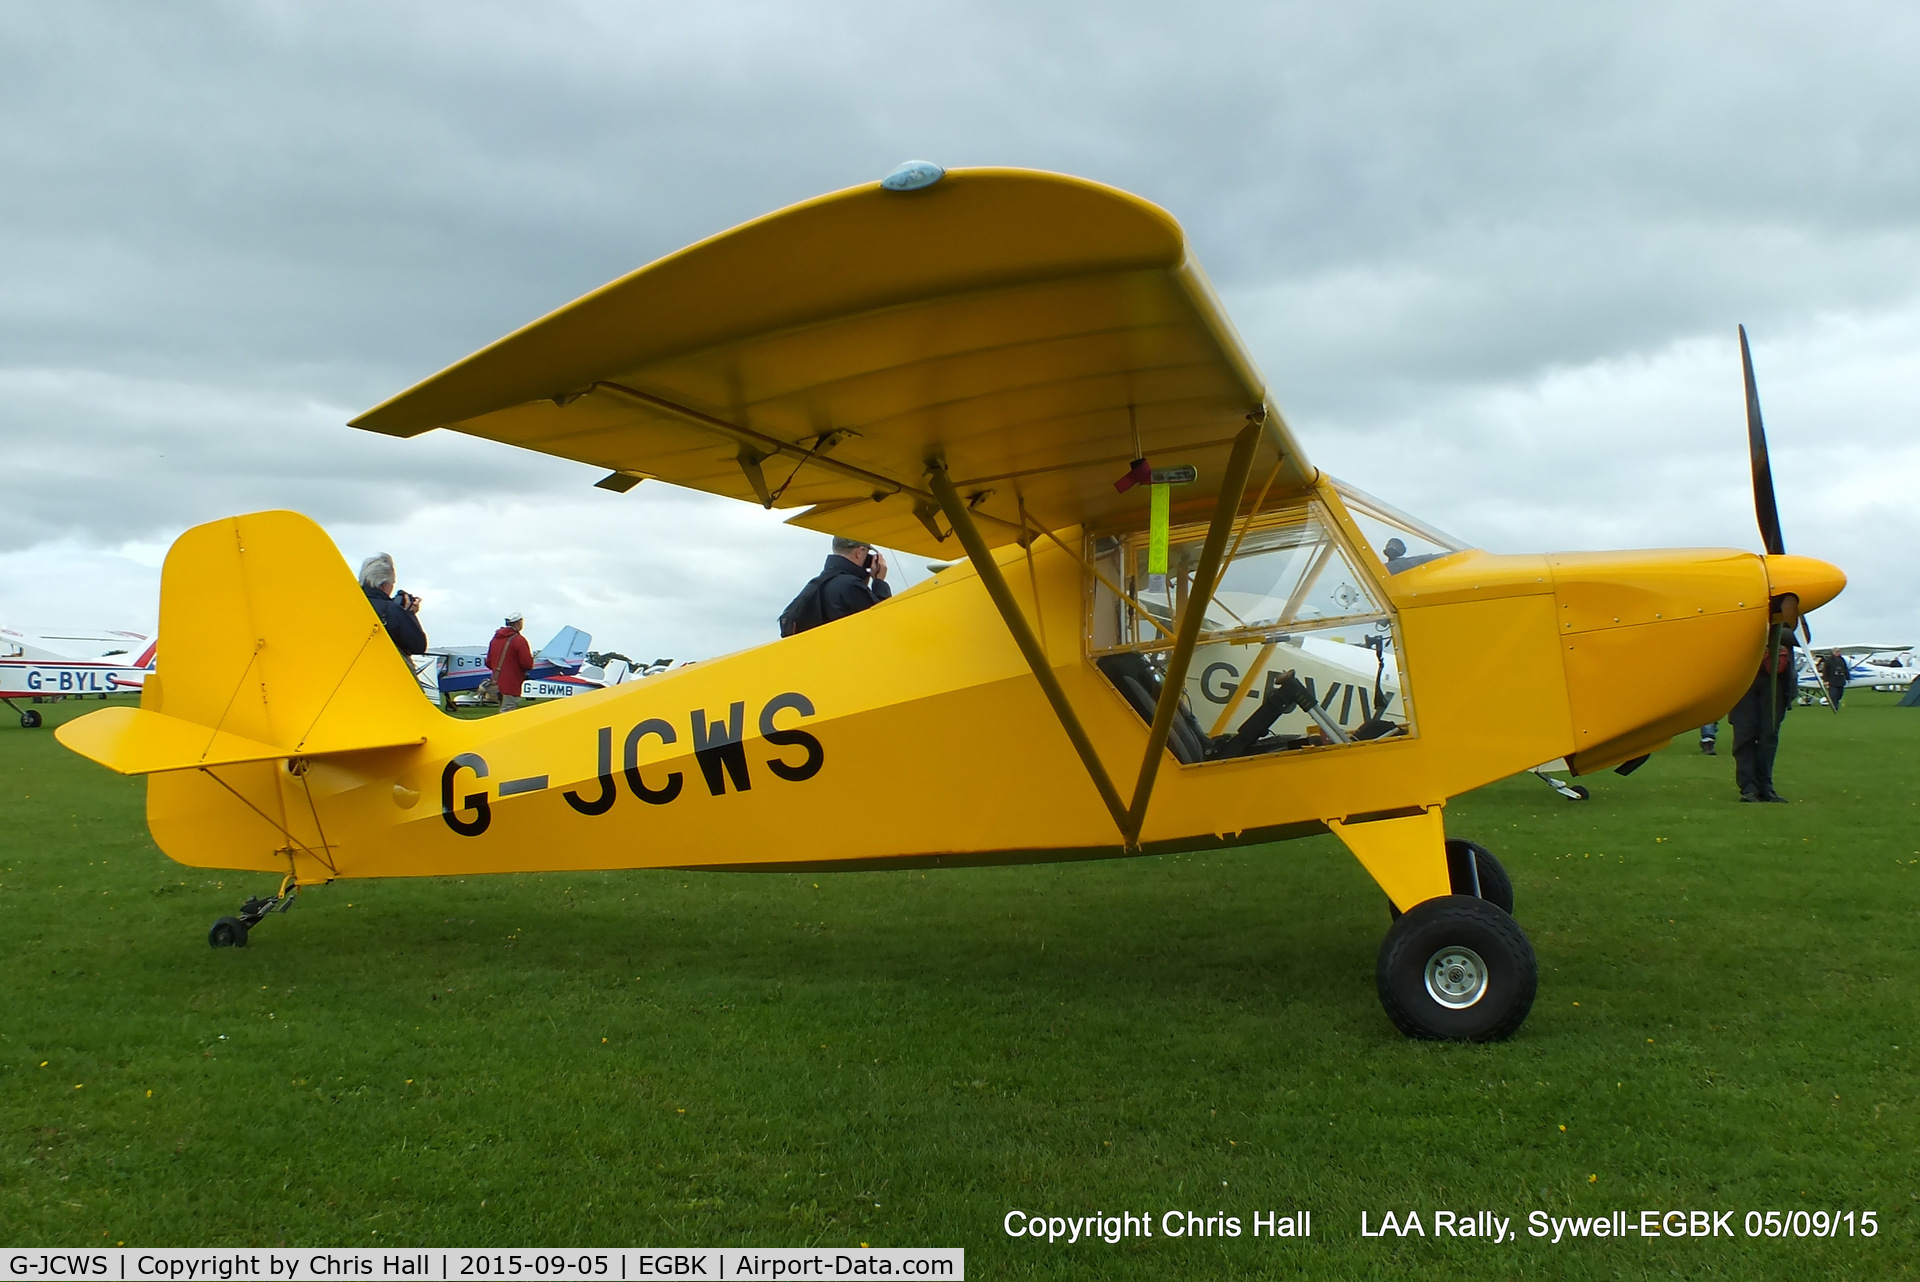 G-JCWS, 2012 Escapade 912(2) C/N BMAA/HB/606, at the LAA Rally 2015, Sywell